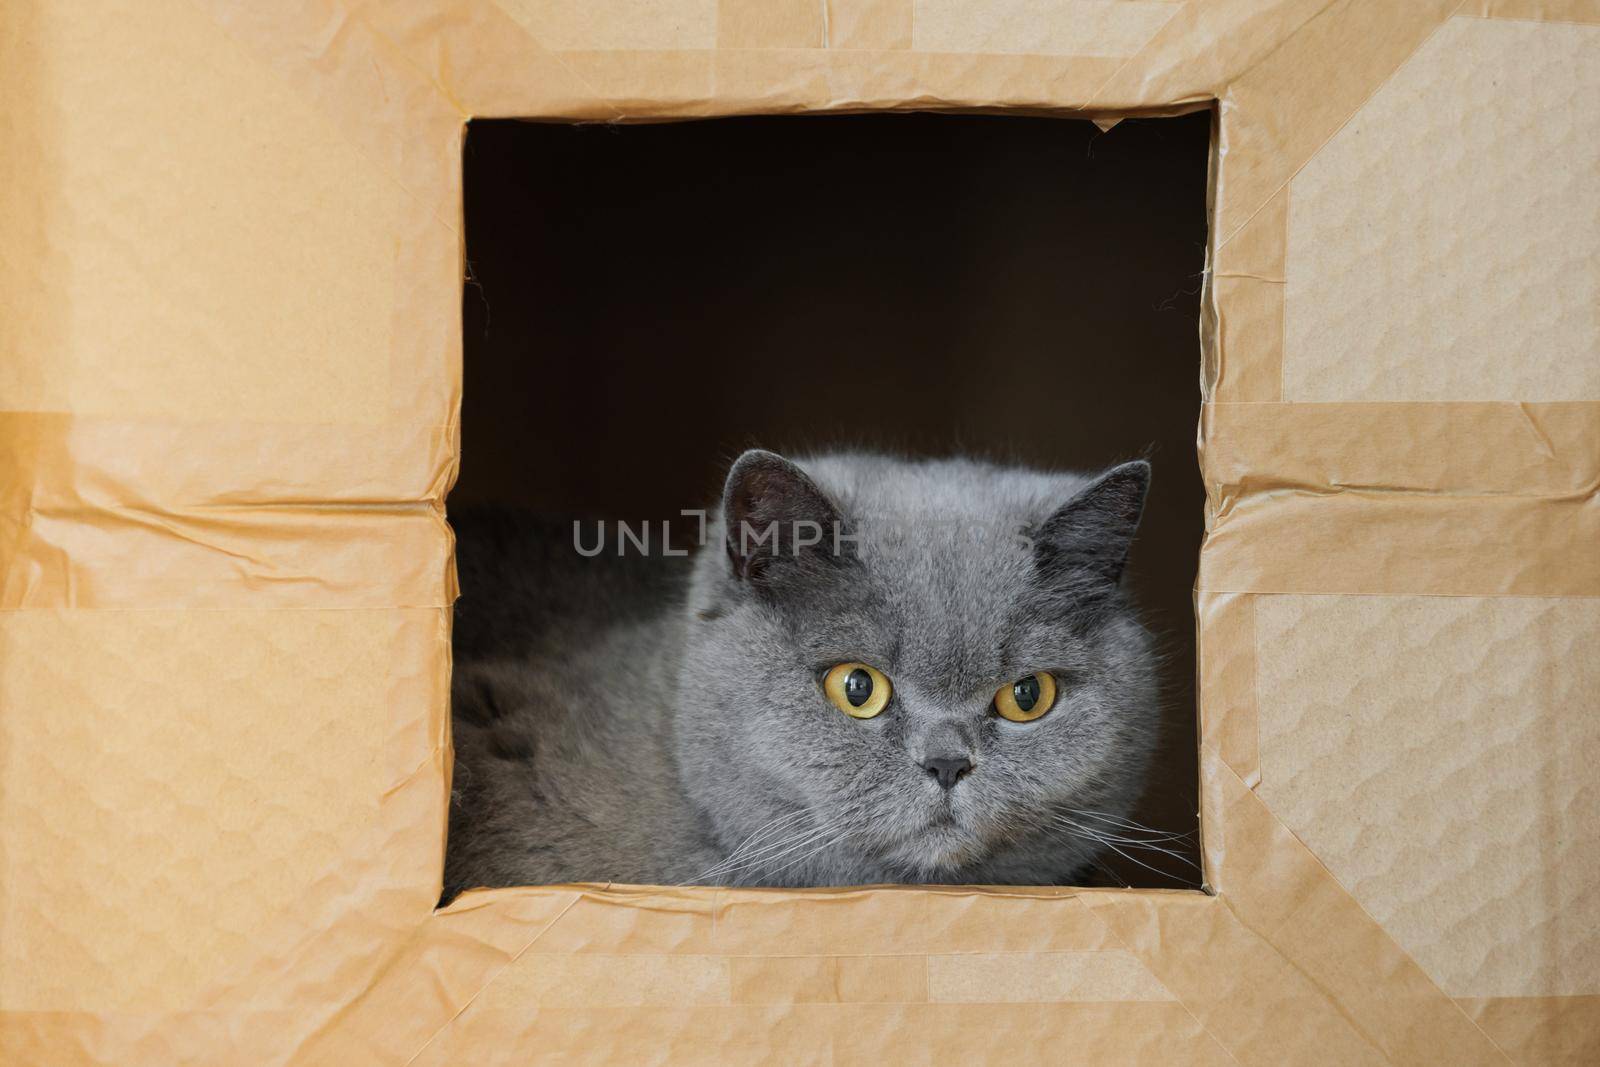 A sad british cat seat lonely in a cardboard box. Grey cat looking through the window. Concept of homeless and lonely pets